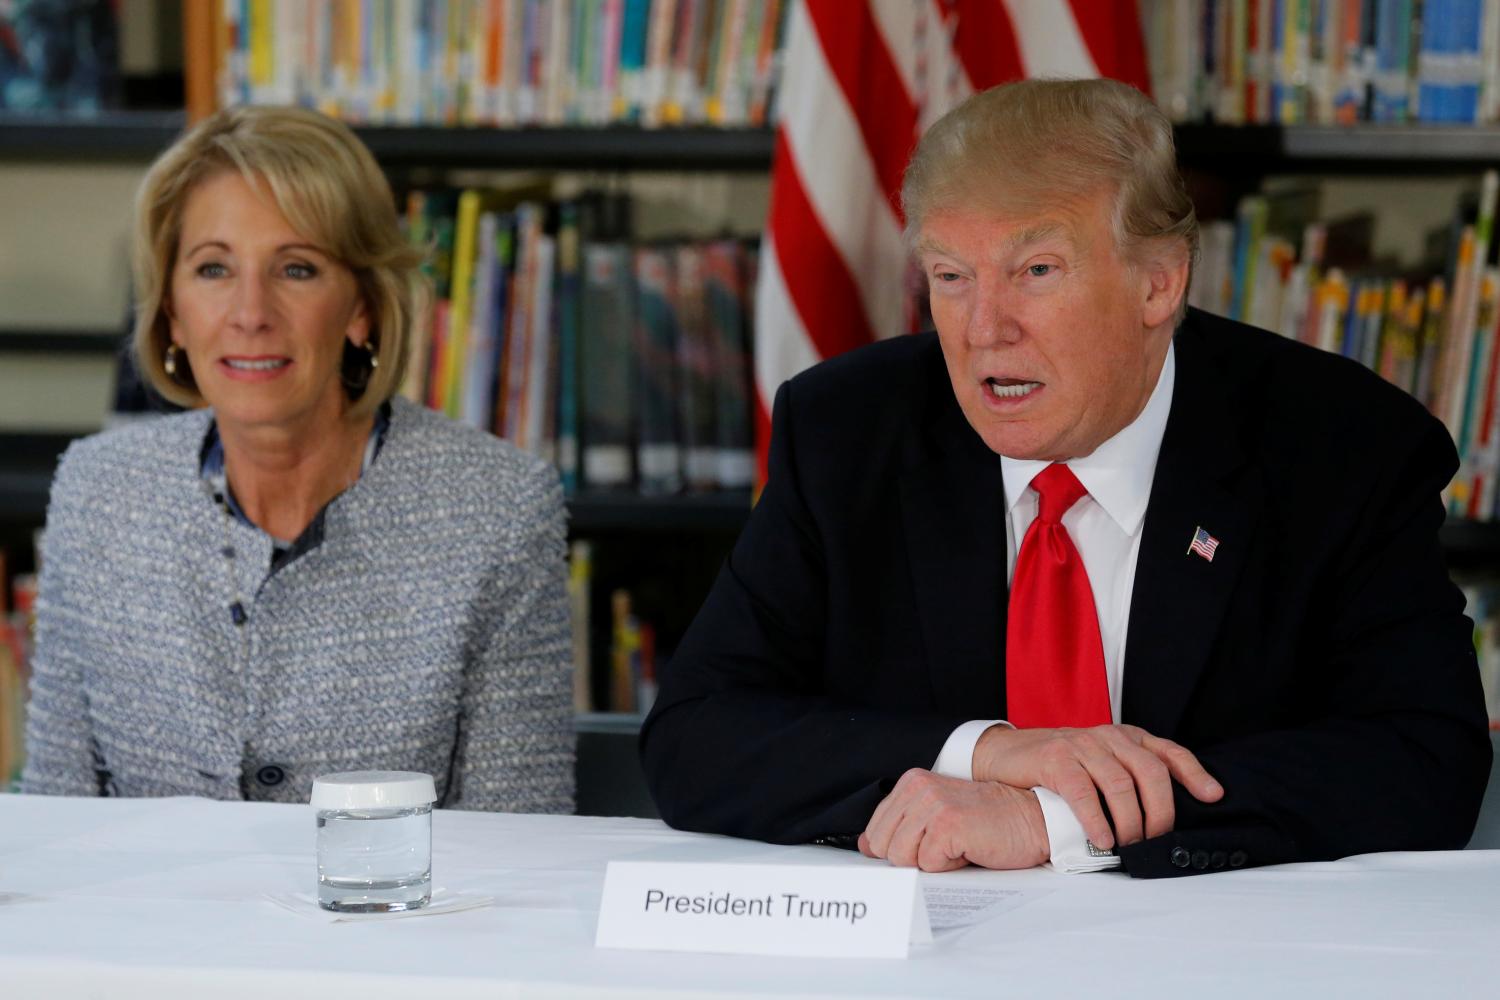 Trump and DeVos meet with parents and teachers at Saint Andrew Catholic School in Orlando, Florida